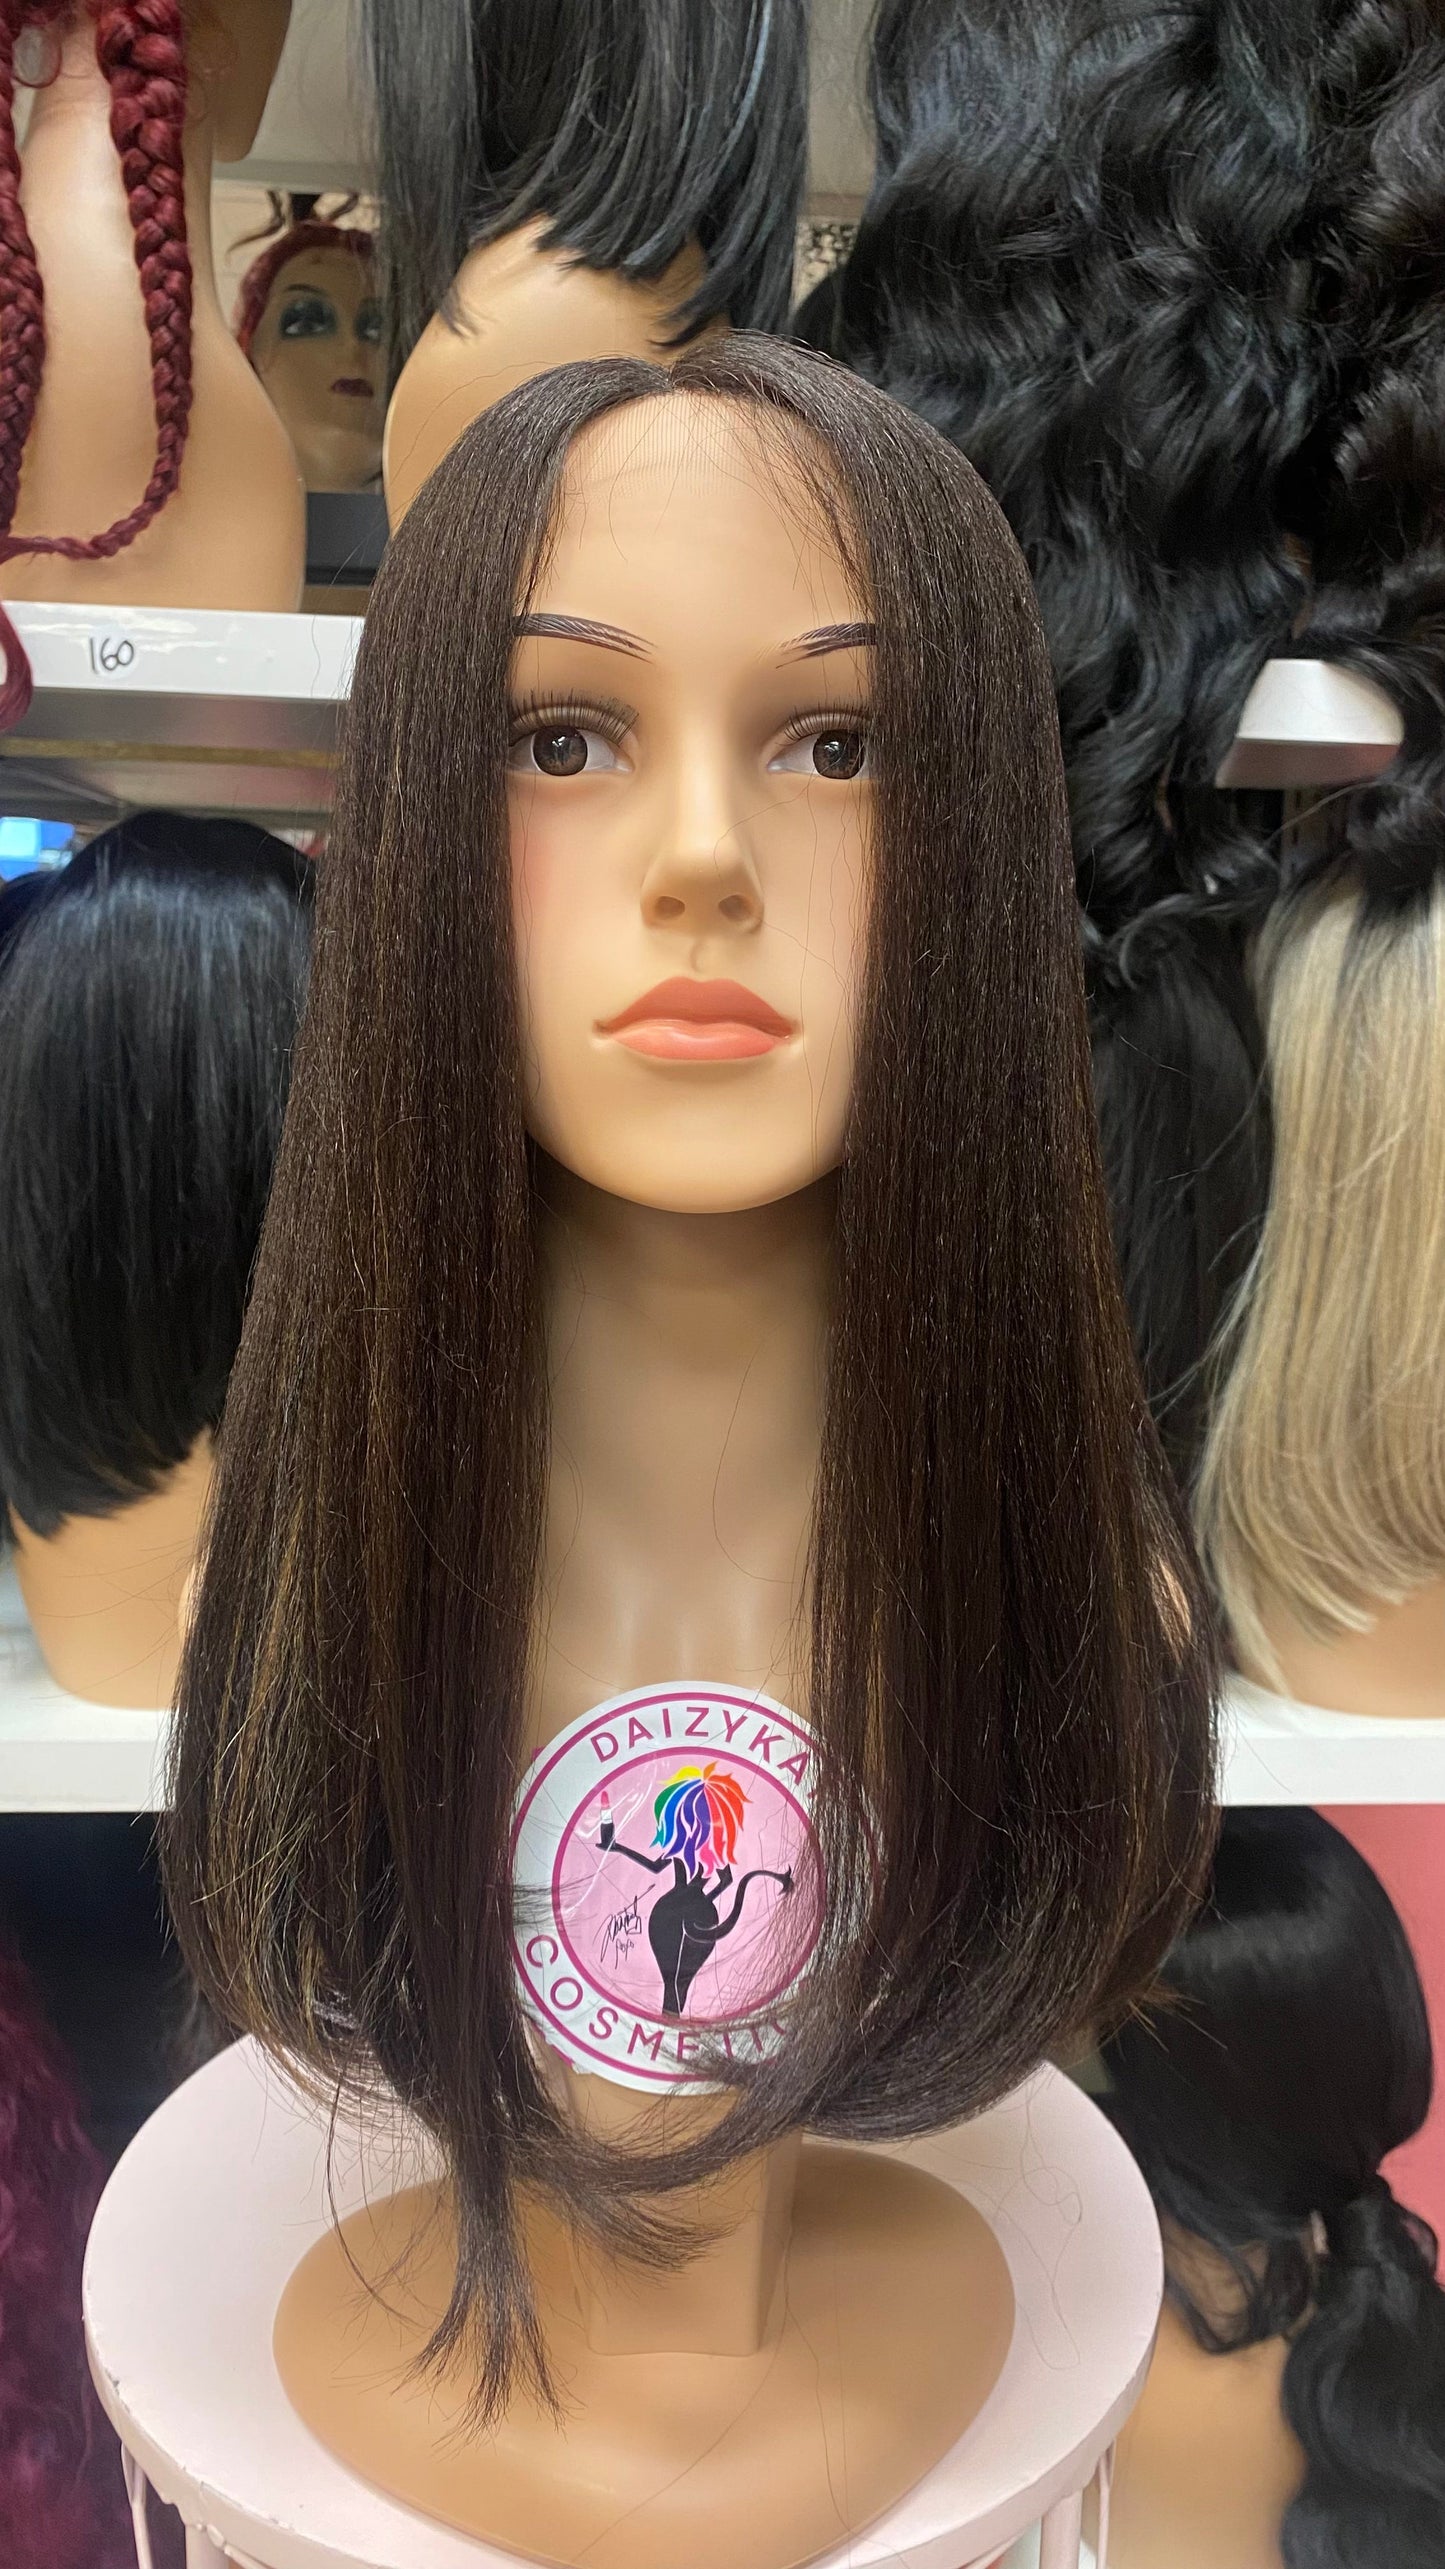 438 Sandra - Middle Part Lace Front Wig Human Hair Blend- 4/27 - DaizyKat Cosmetics 438 Sandra - Middle Part Lace Front Wig Human Hair Blend- 4/27 DaizyKat Cosmetics Wigs